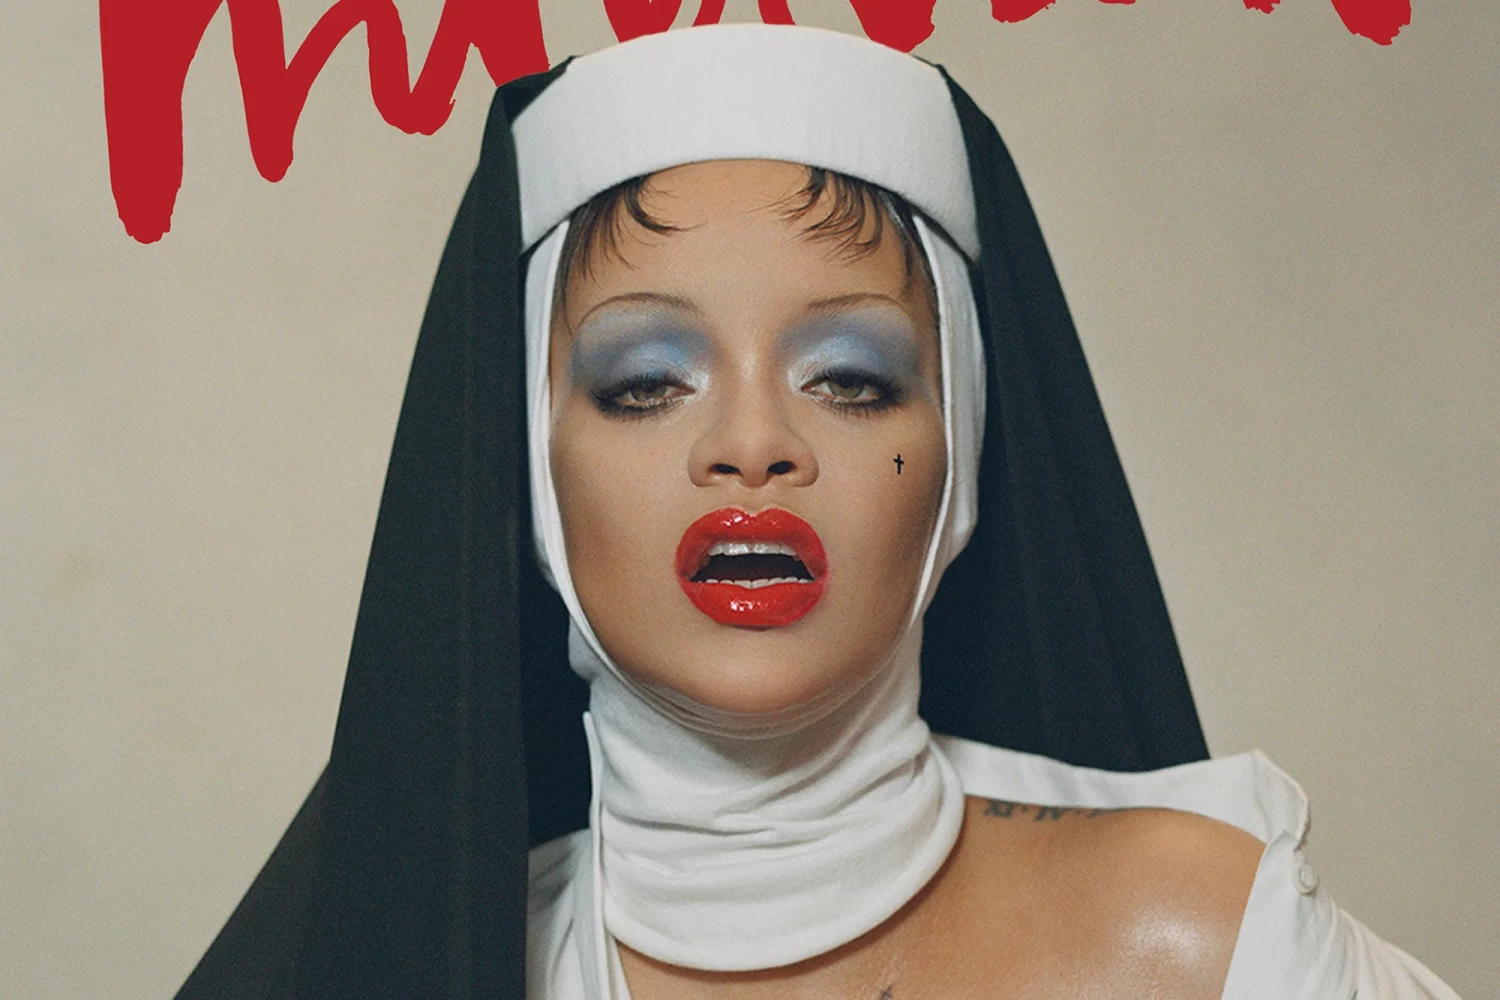 Why is pop culture so obsessed with nuns?